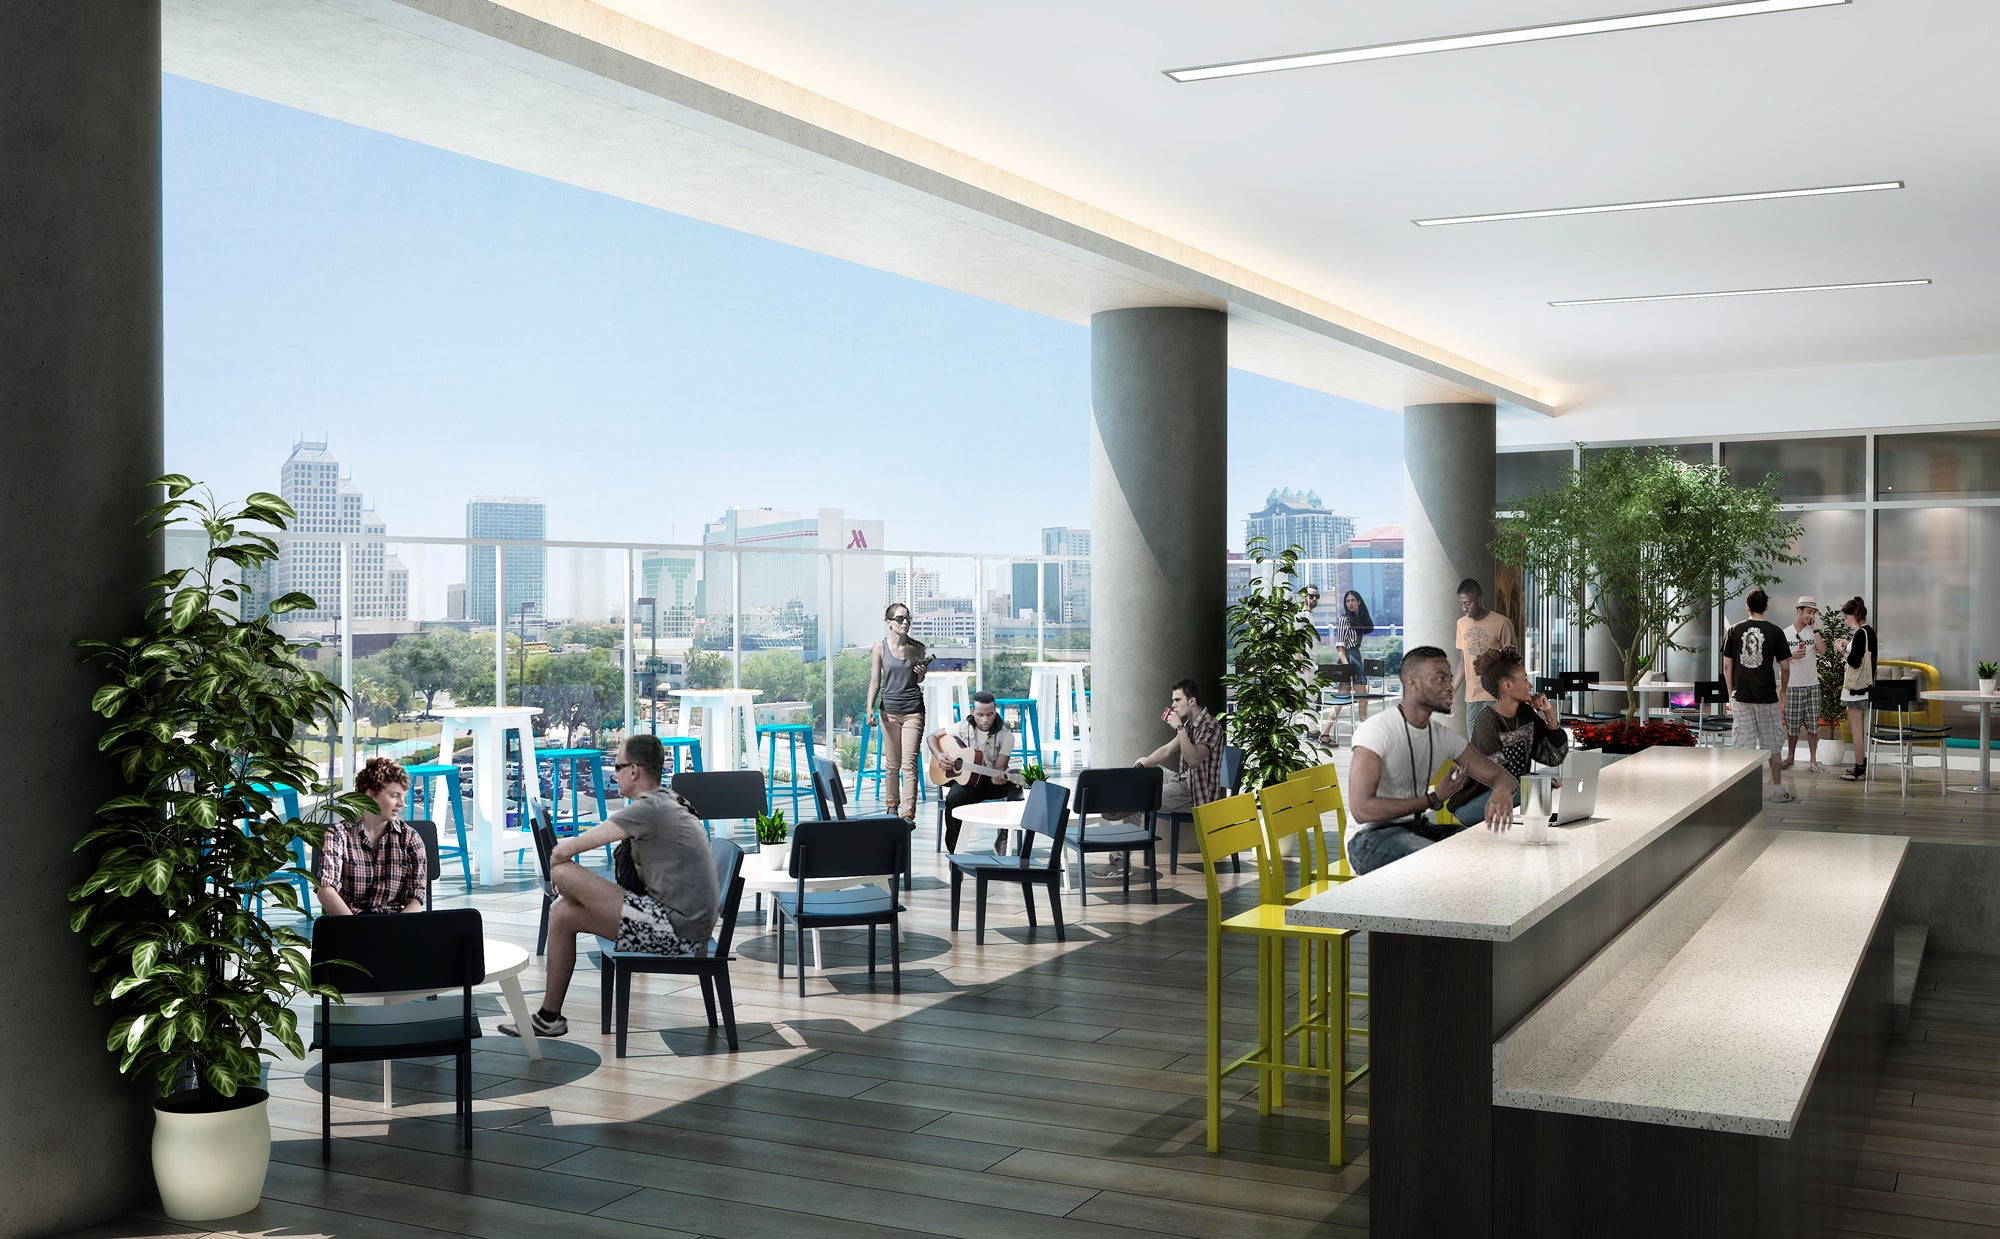 The Collaborative, located on the 6th floor, includes an outdoor patio overlooking downtown Orlando and Creative Village Central Park.